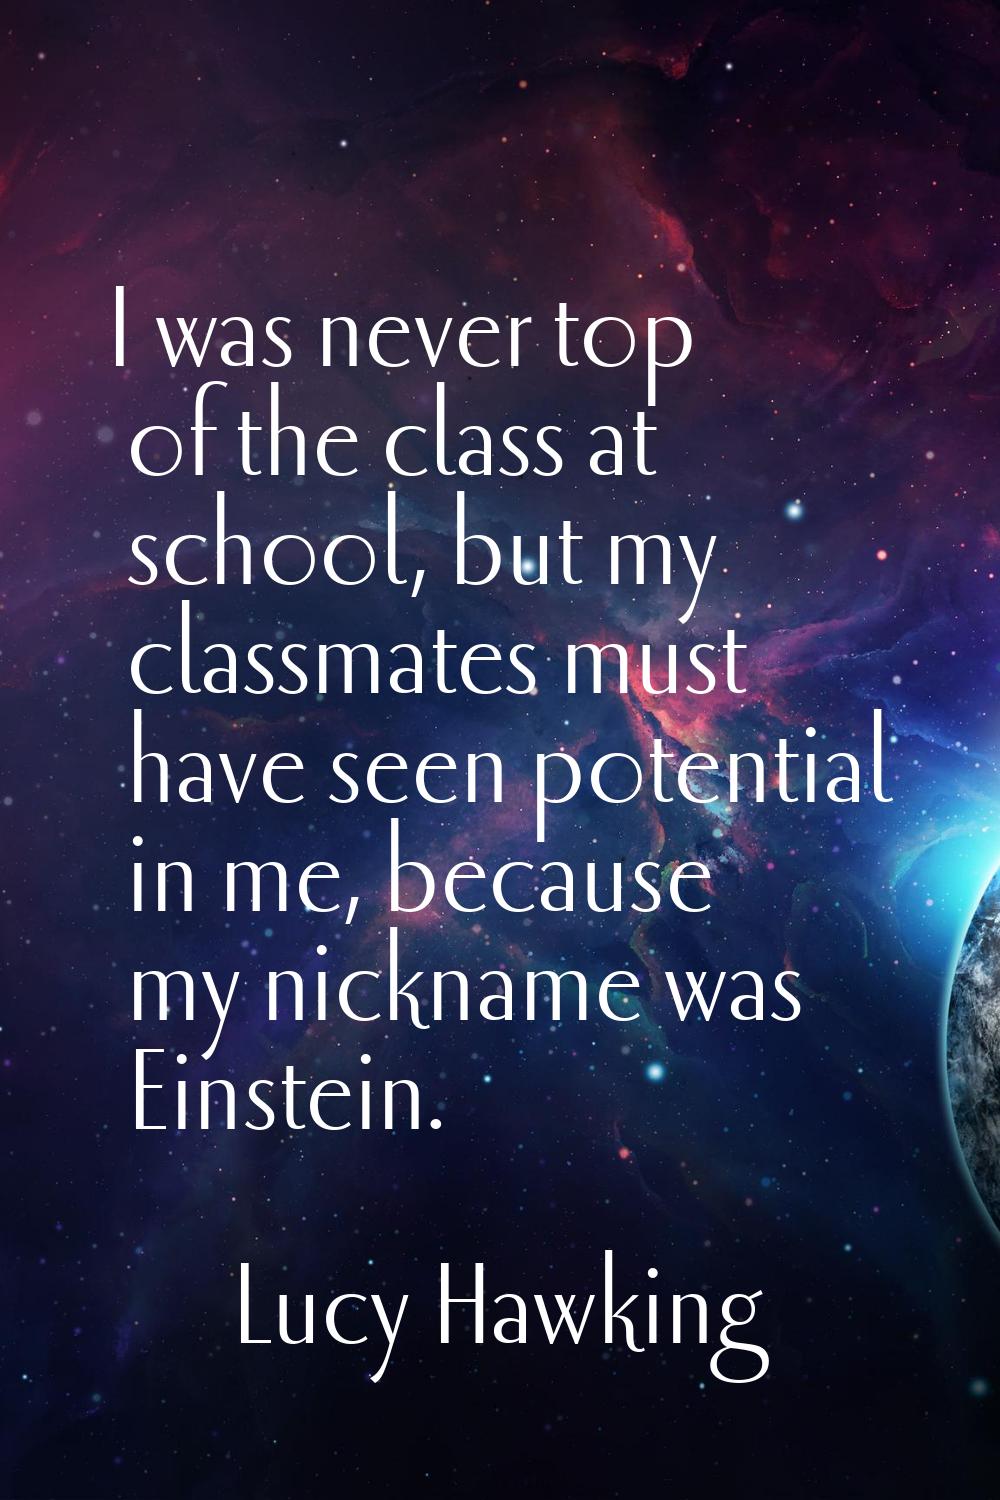 I was never top of the class at school, but my classmates must have seen potential in me, because m